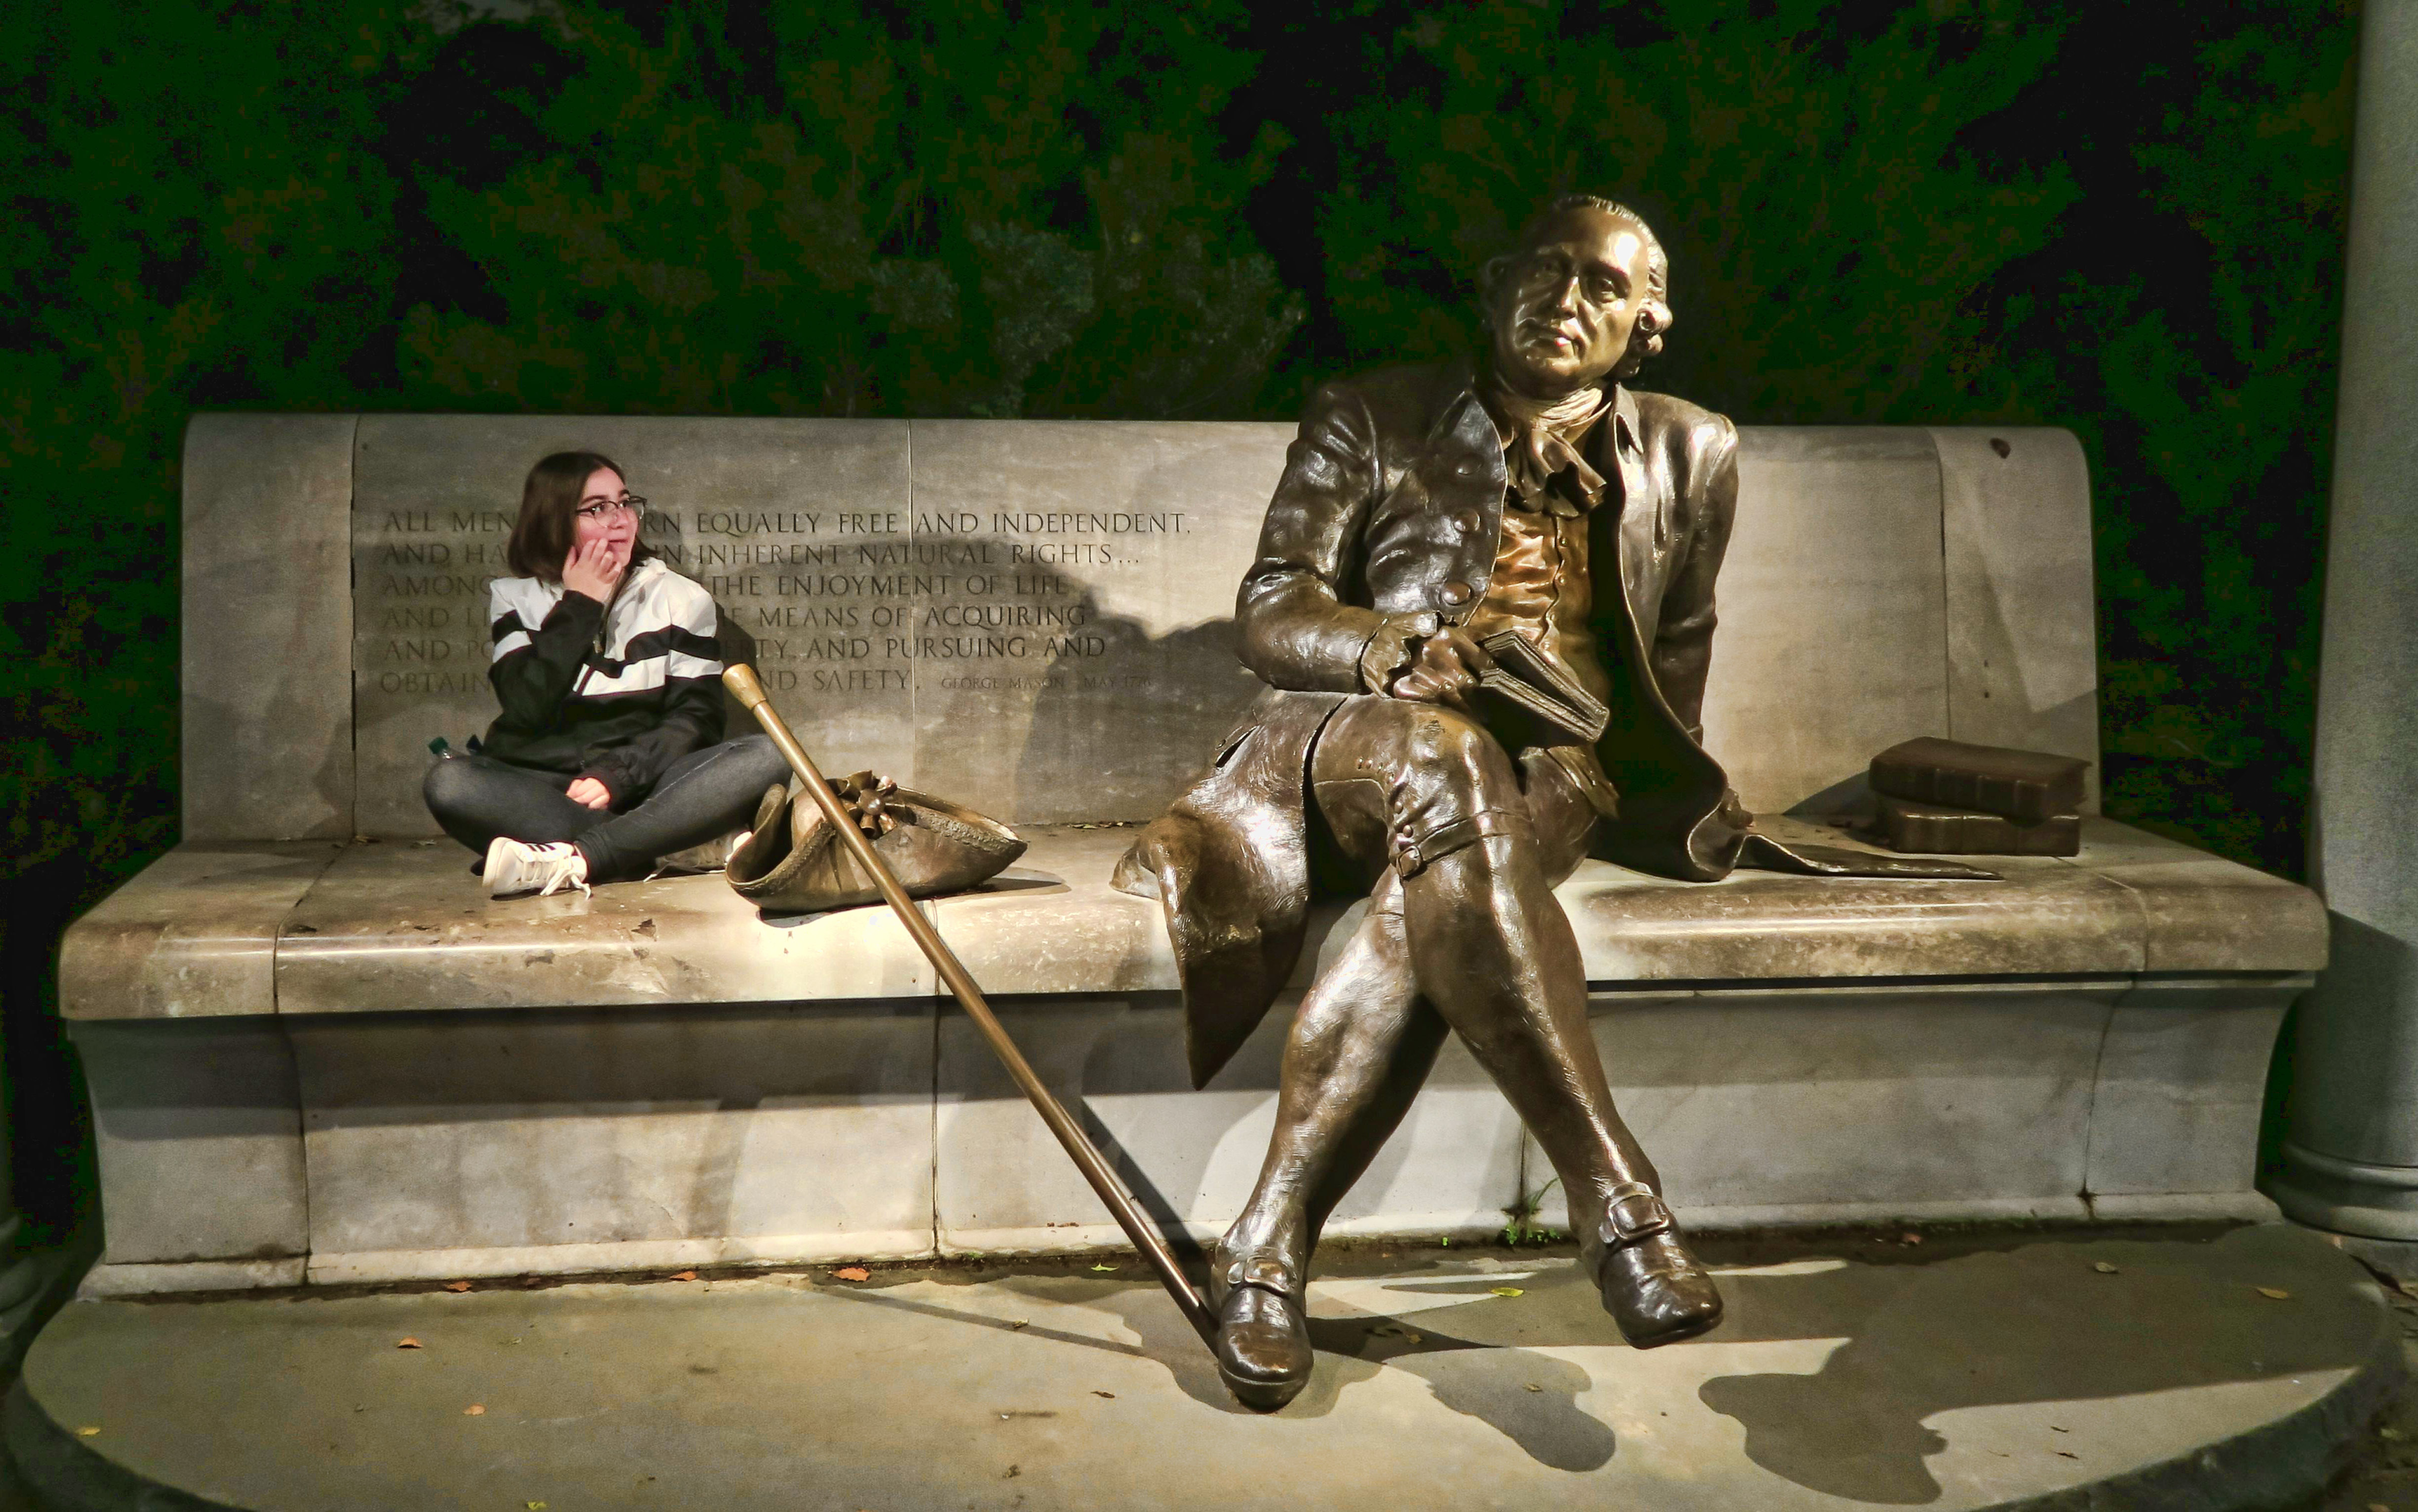 Having a chat with George Mason to figure out why he is known as "The Forgotten Founder."